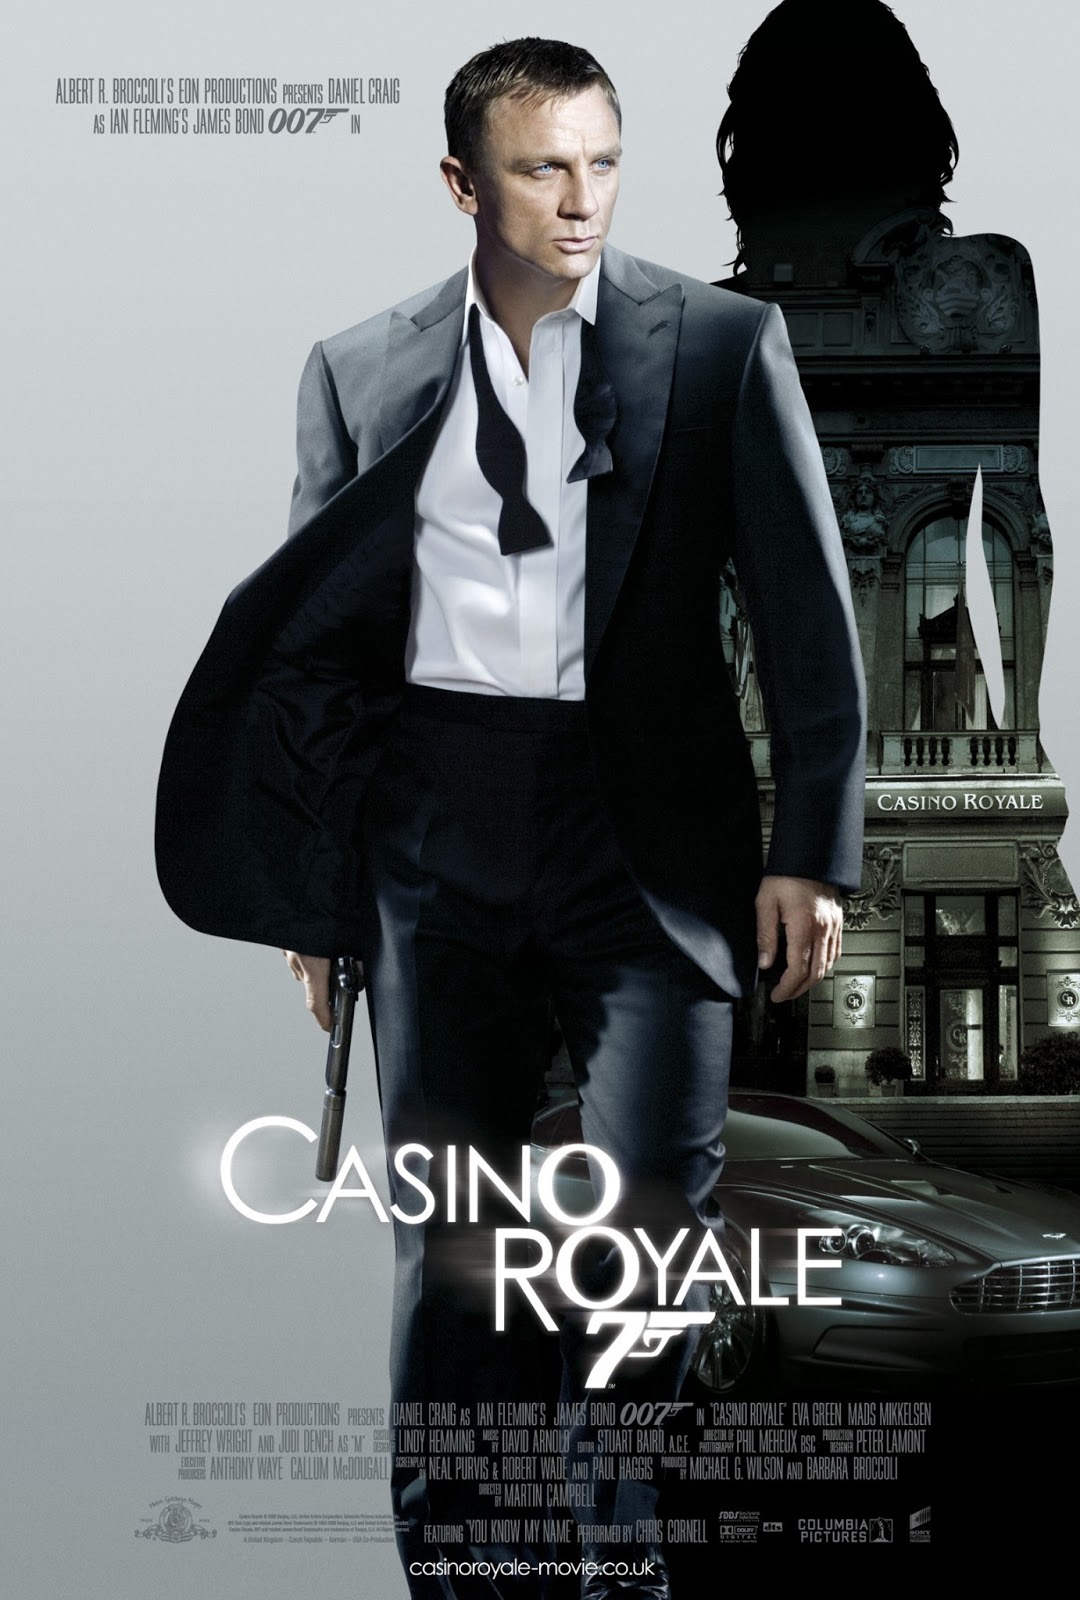 Experiment Farm: Casino Royale - One of the Best